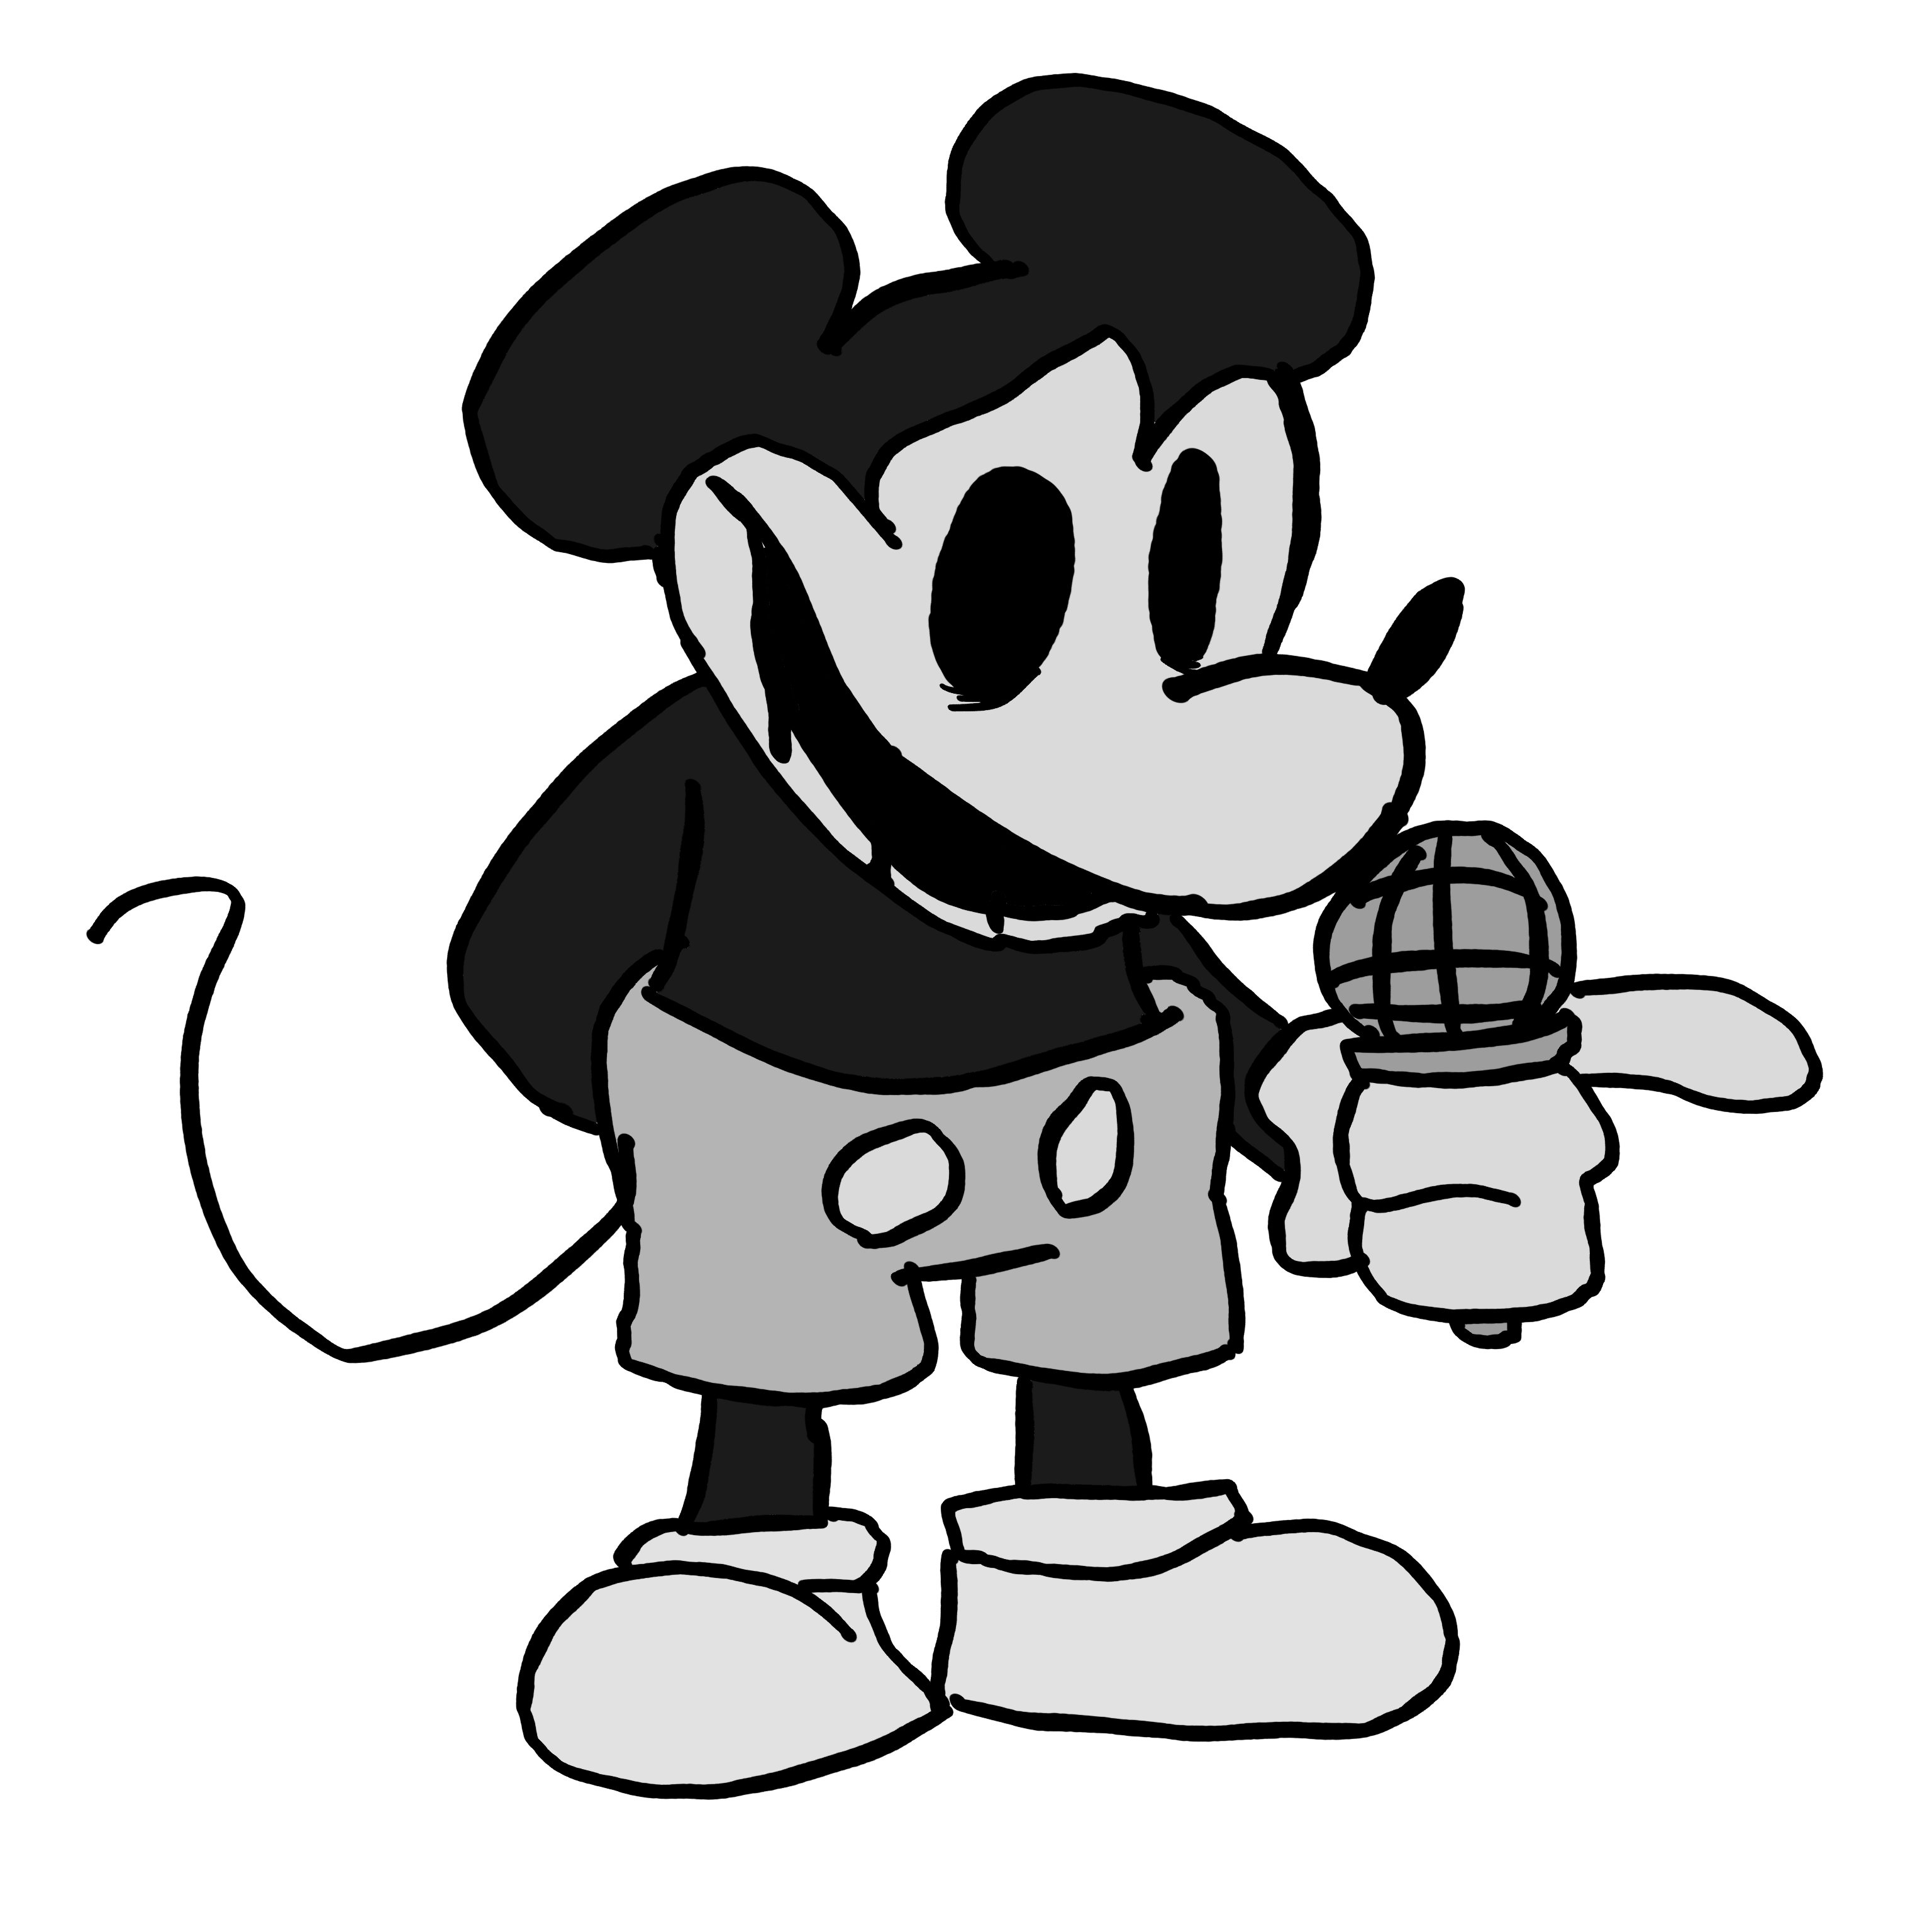 Mouse by TIKYISFUNNY on Newgrounds